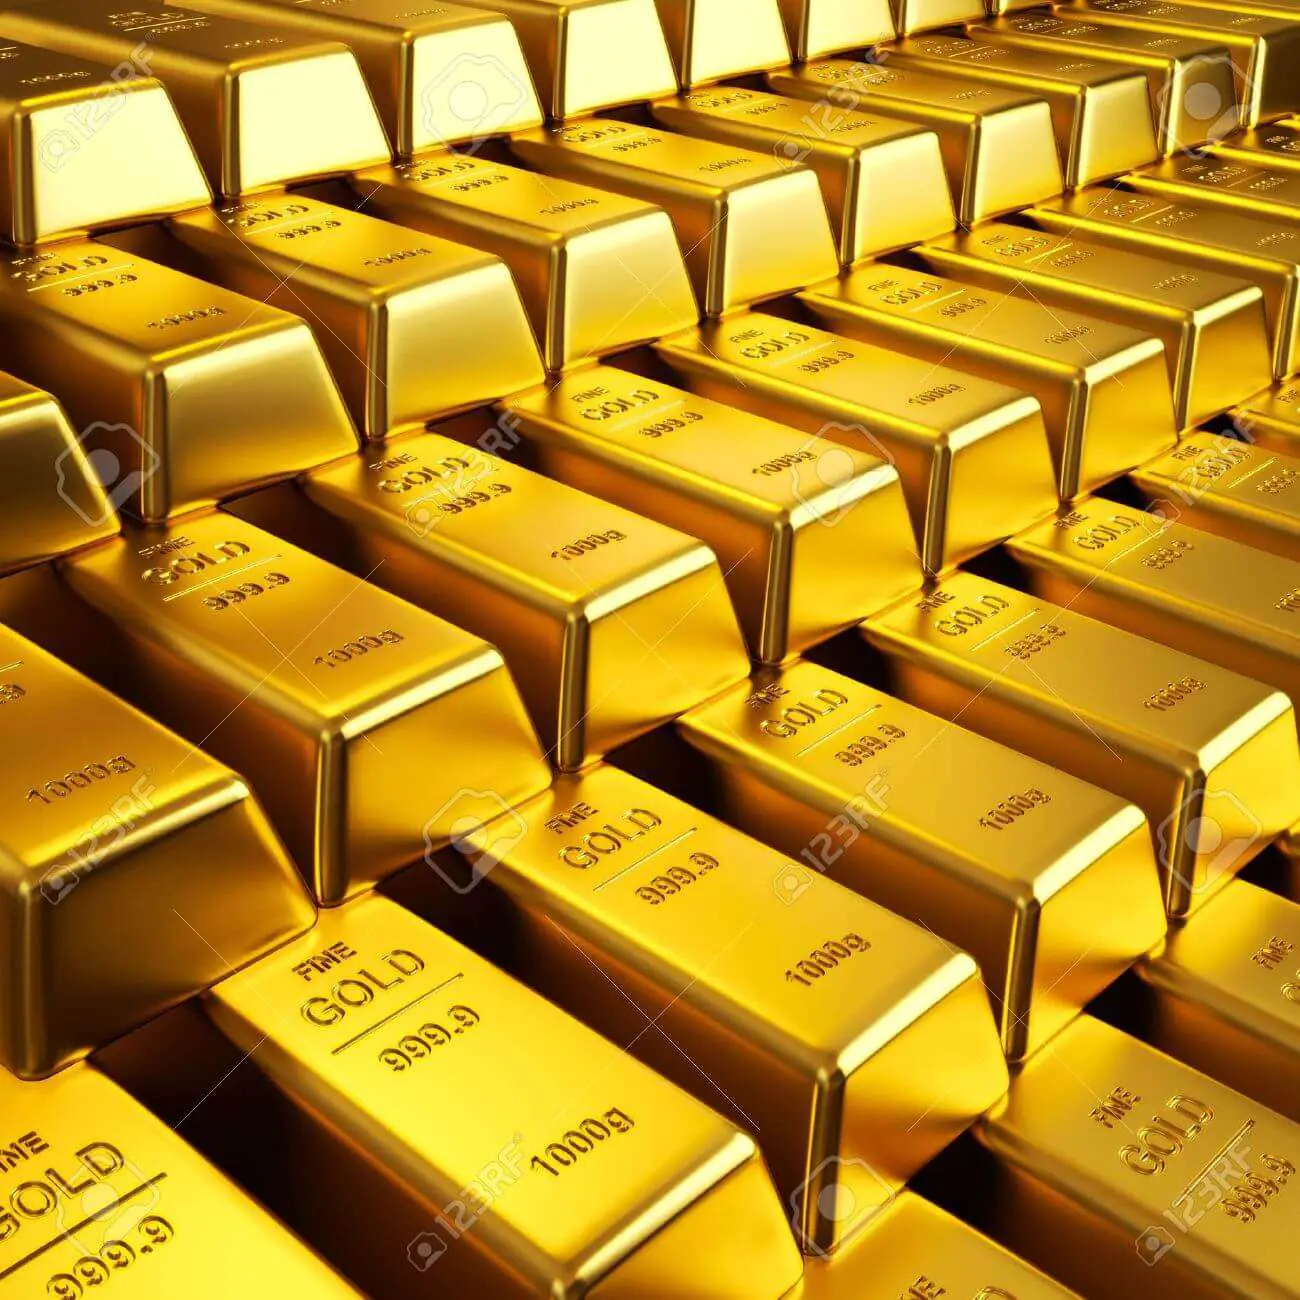 Where is the Best Place to Buy Gold Bars?